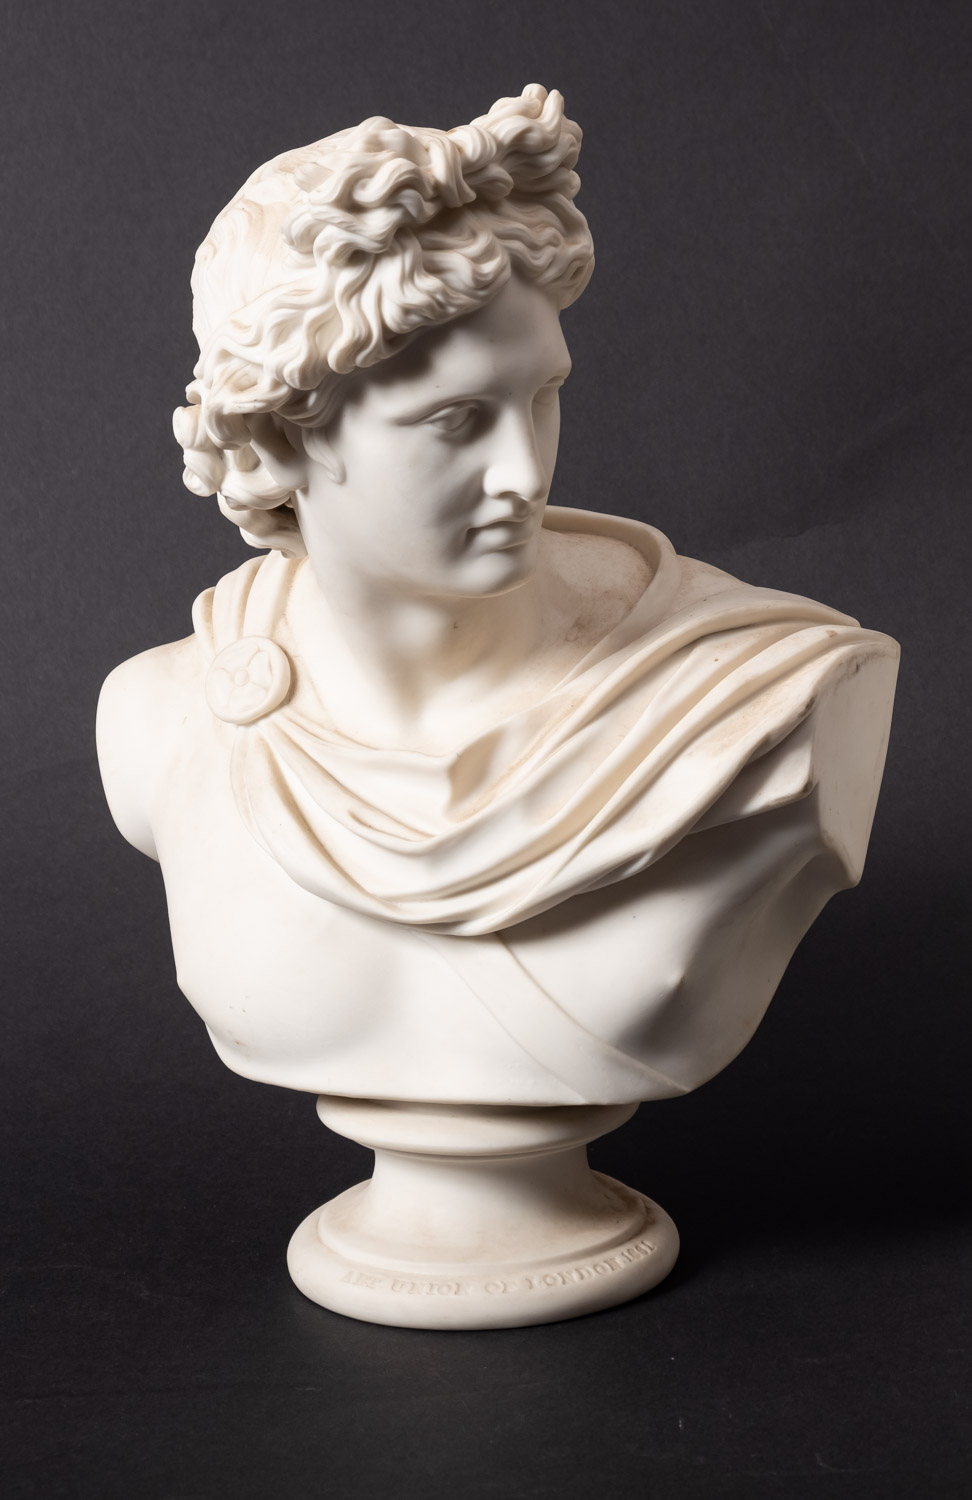 A Parian ware classical bust of Apollo, on circular socle, inscribed 'C DELPECH',